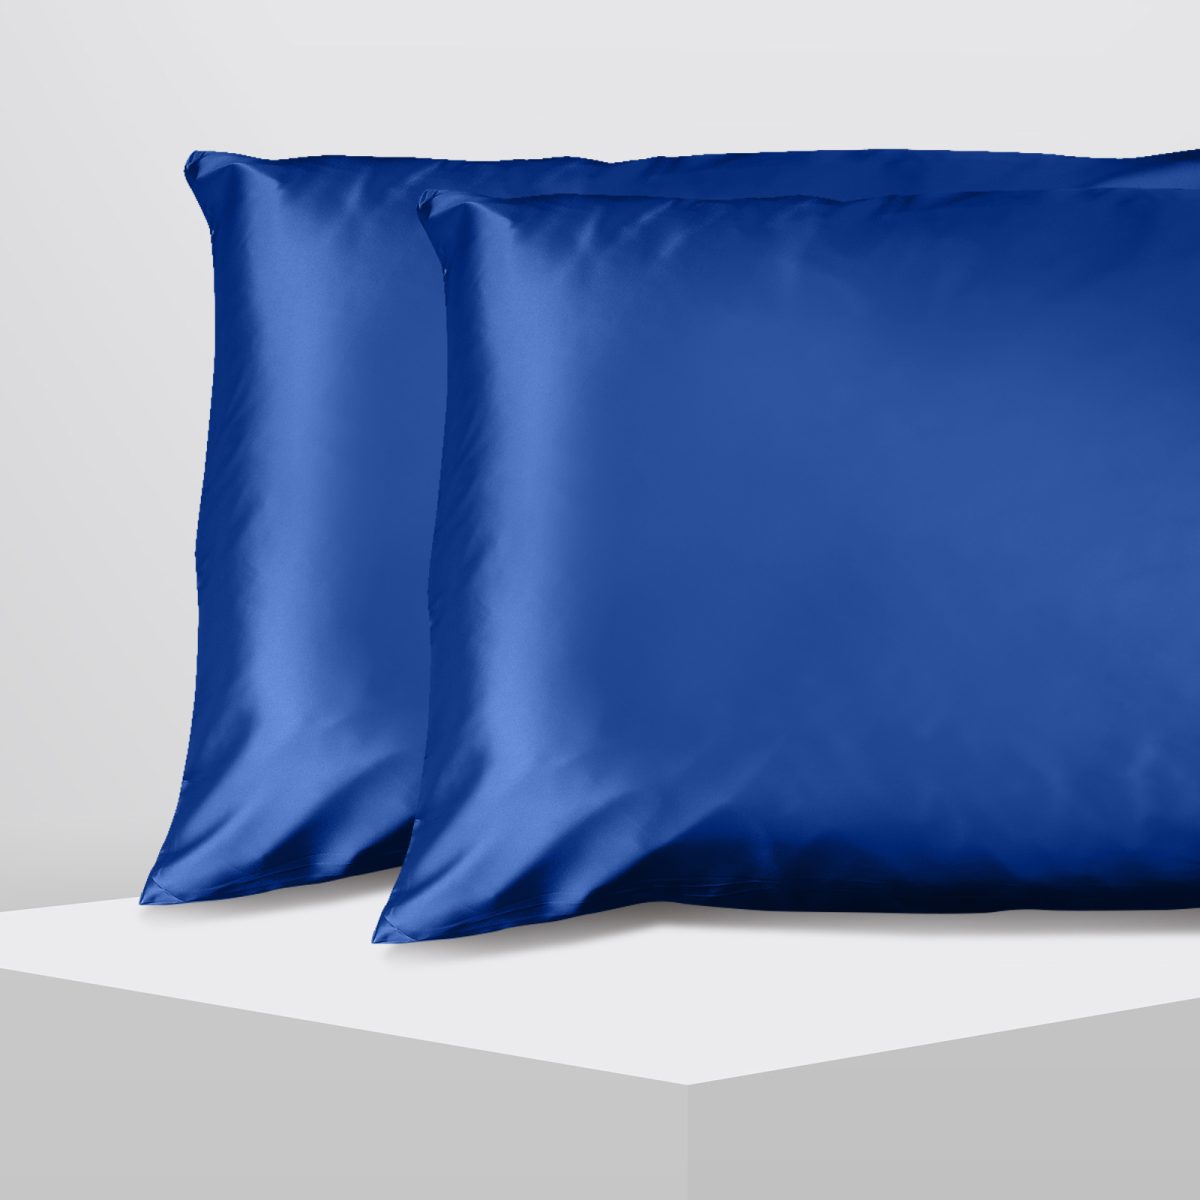 Casa Decor Luxury Satin Pillowcase Twin Pack Size With Gift Box Luxury  – Navy Blue